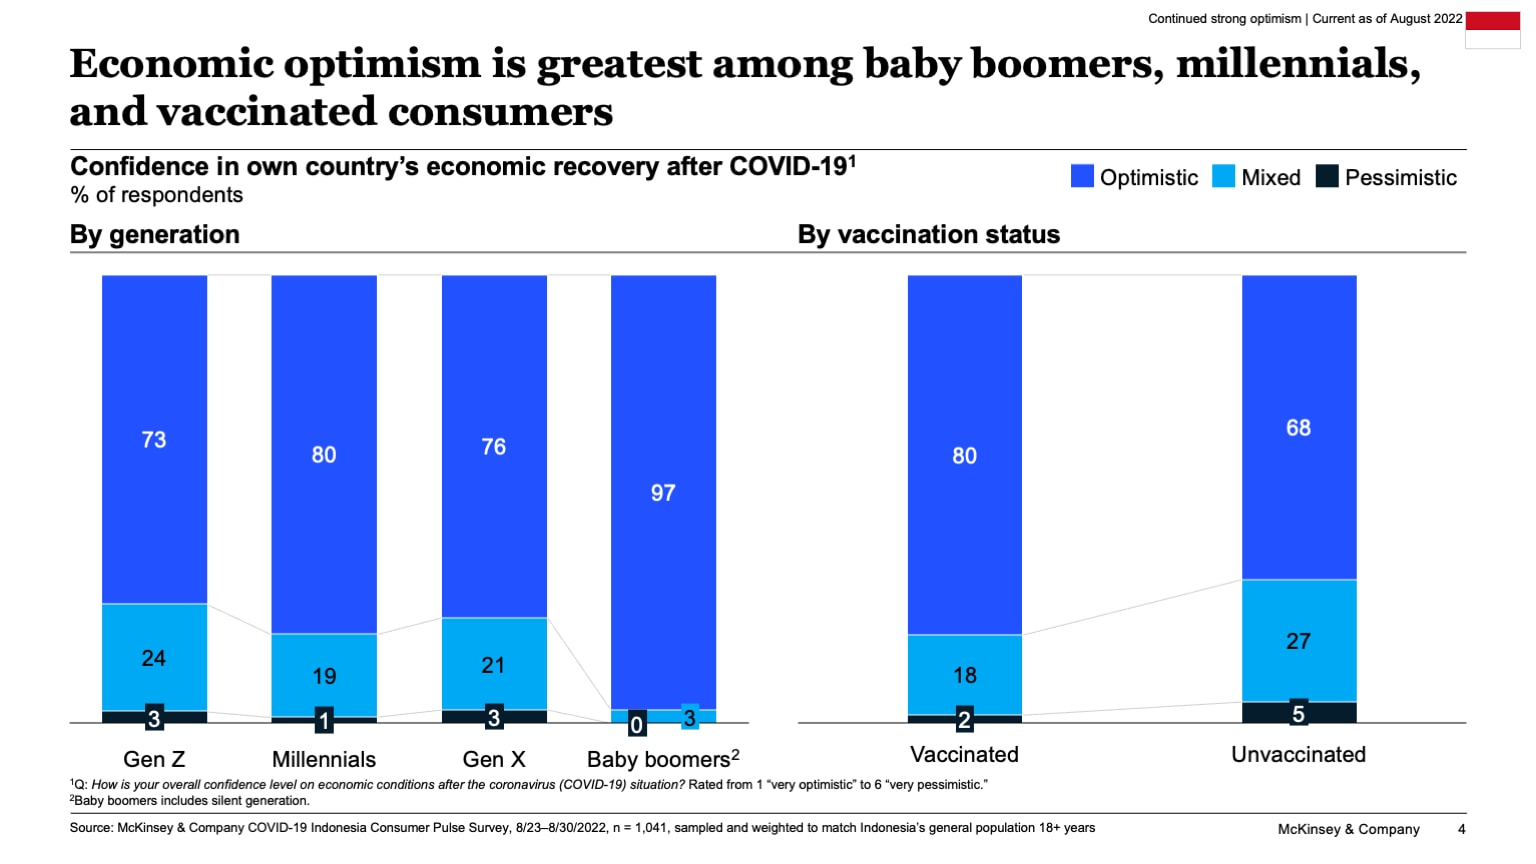 Economic optimism is greatest among baby boomers, millennials, and vaccinated consumers